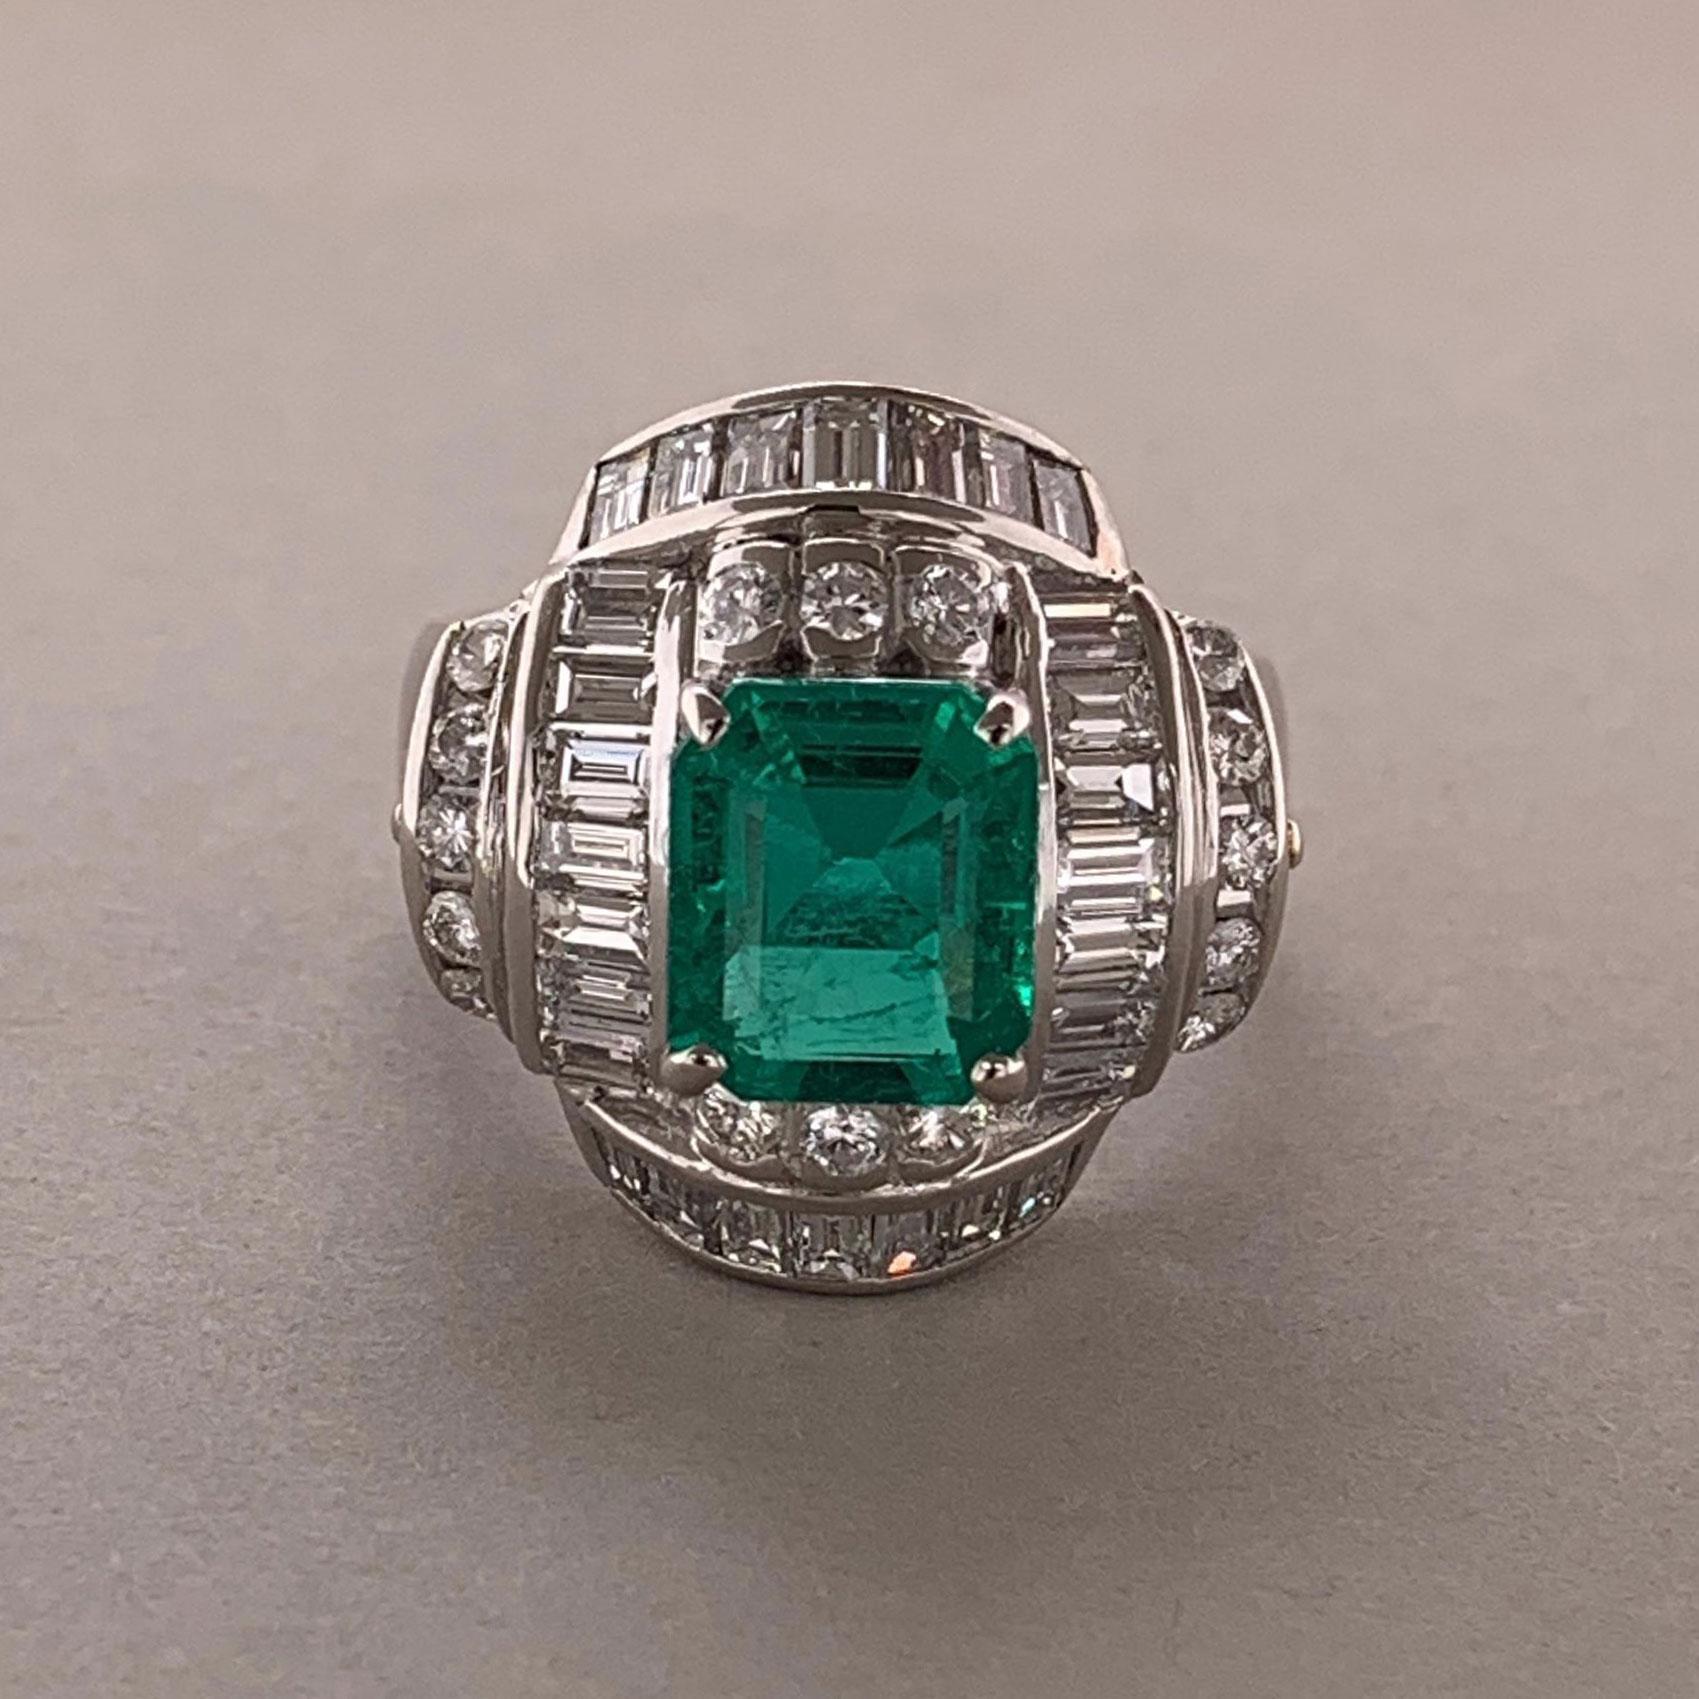 A superb gem quality emerald sits proudly atop this platinum ring. It weighs 2.47 carats and has a bright vivid green color while being free of any noticeable inclusions commonly found in emeralds. It is accompanied by 2.23 carats of round brilliant